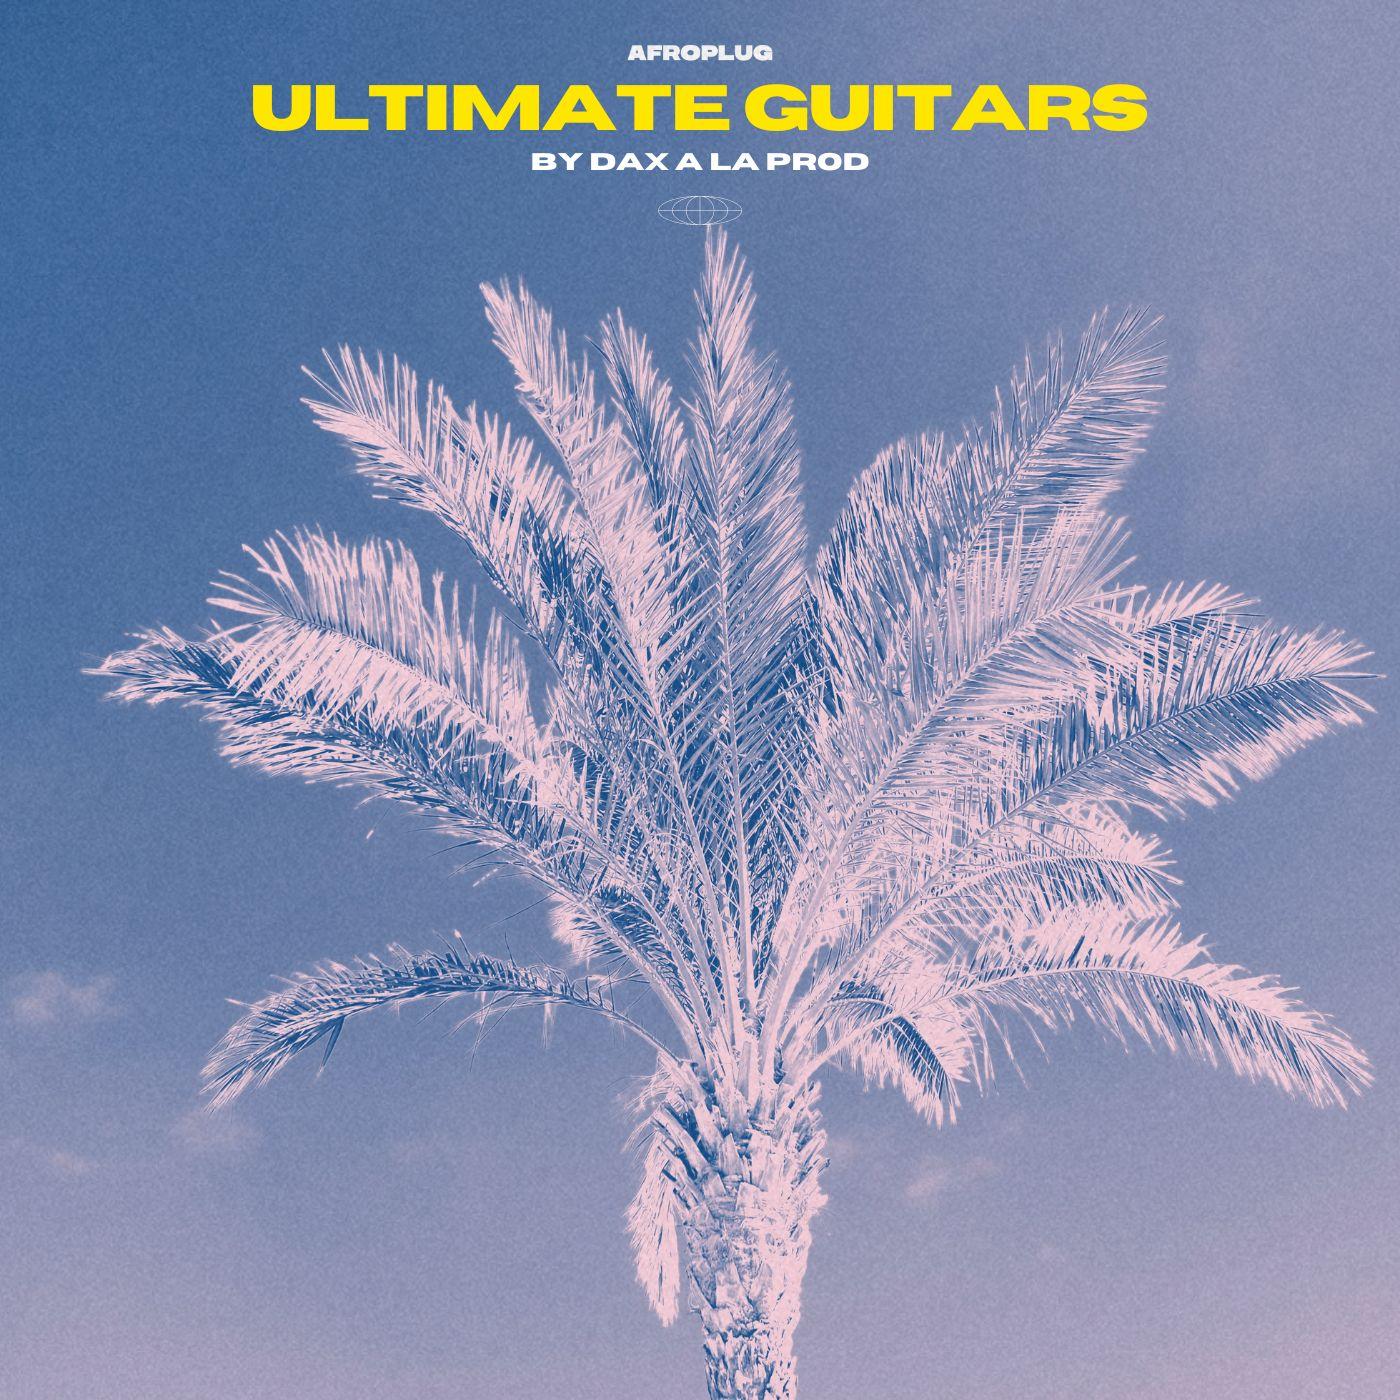 40+ Ultimate Melody Guitars Pack for Afrotrap, Afrocongo ,Seben & Congolese Rumba